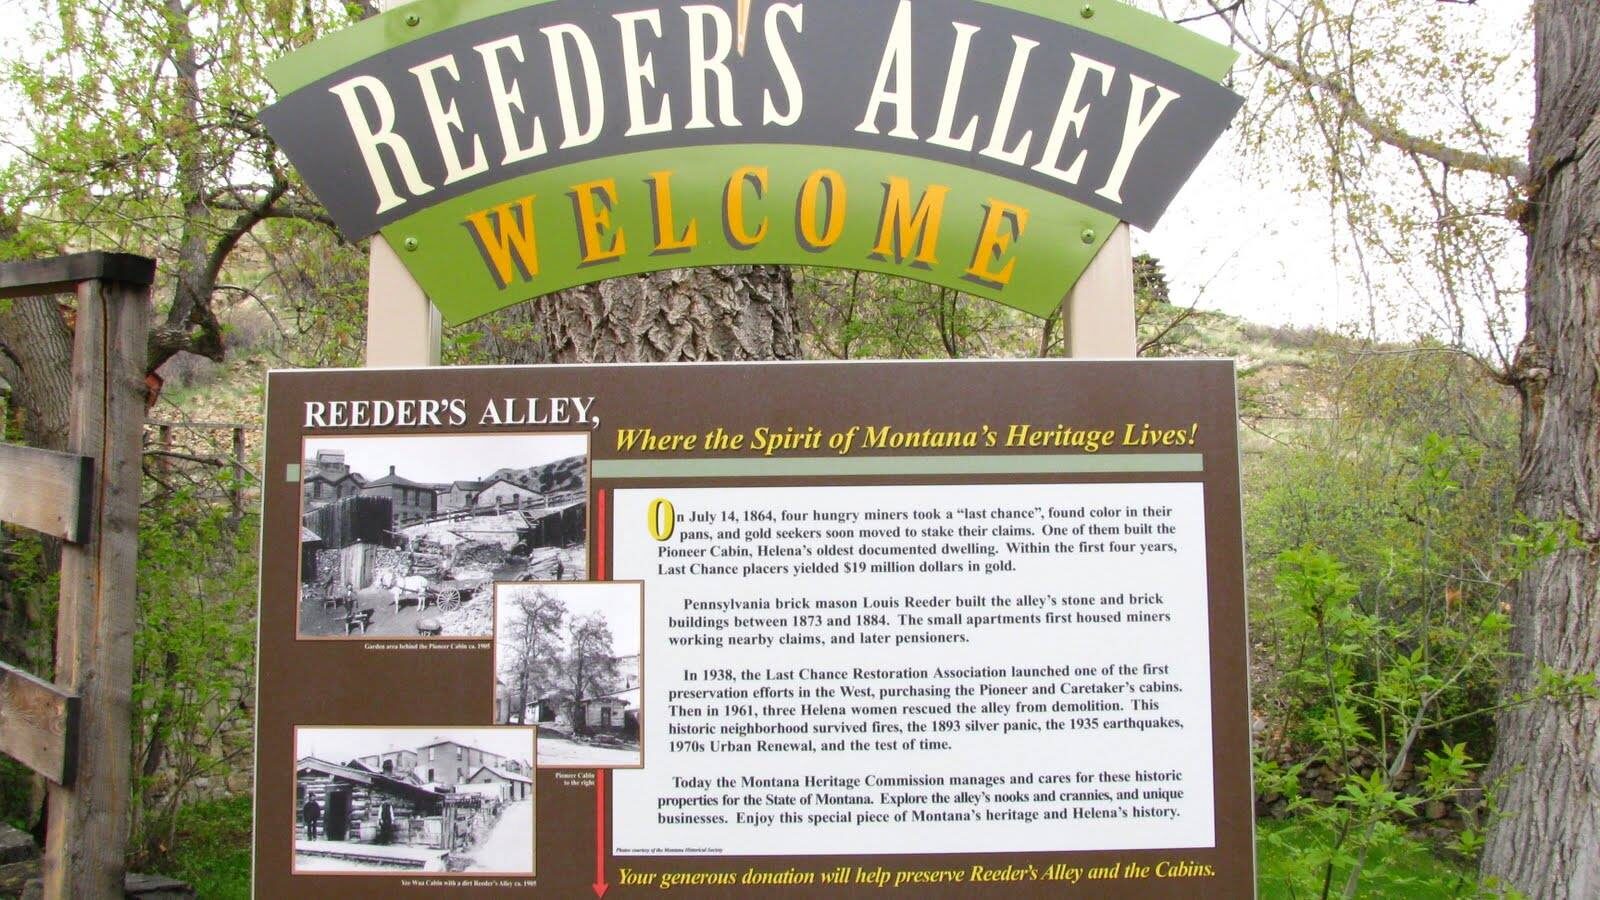 Reeder's Alley was established in 1864, and is the oldest area of Montana's capital